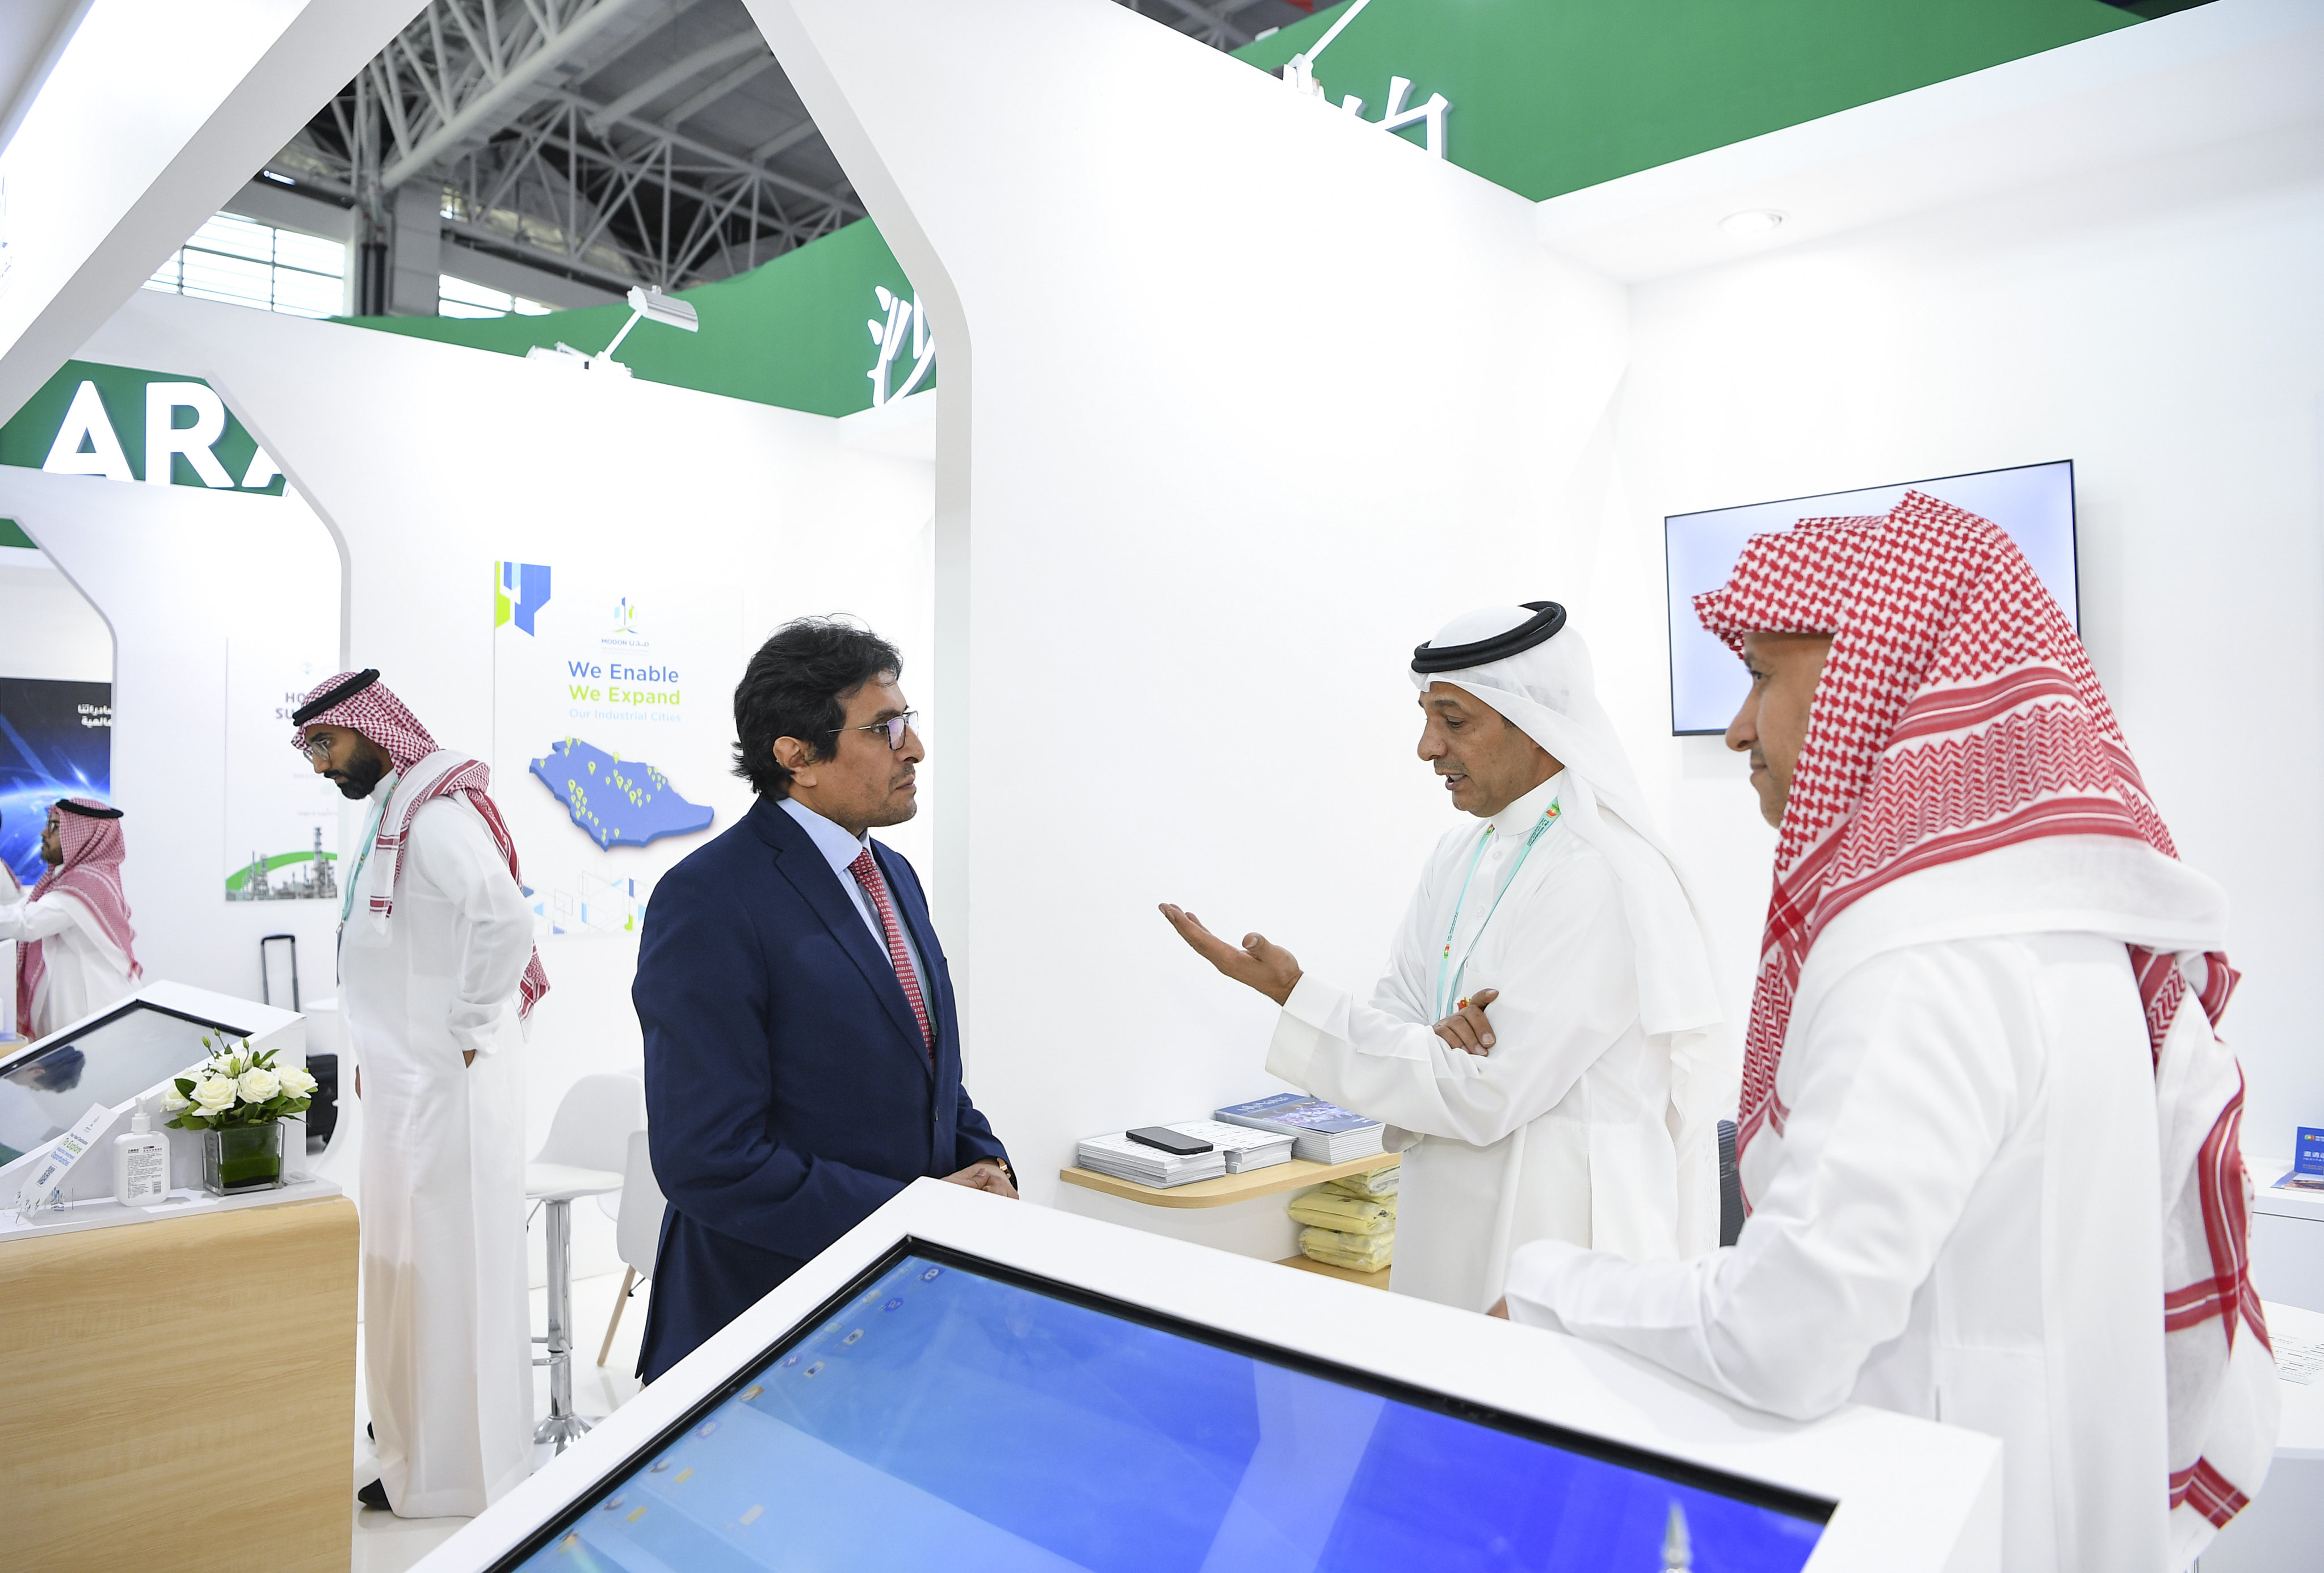 A guest talks with exhibitors at the Saudi booth during the expo. Photo: Xinhua